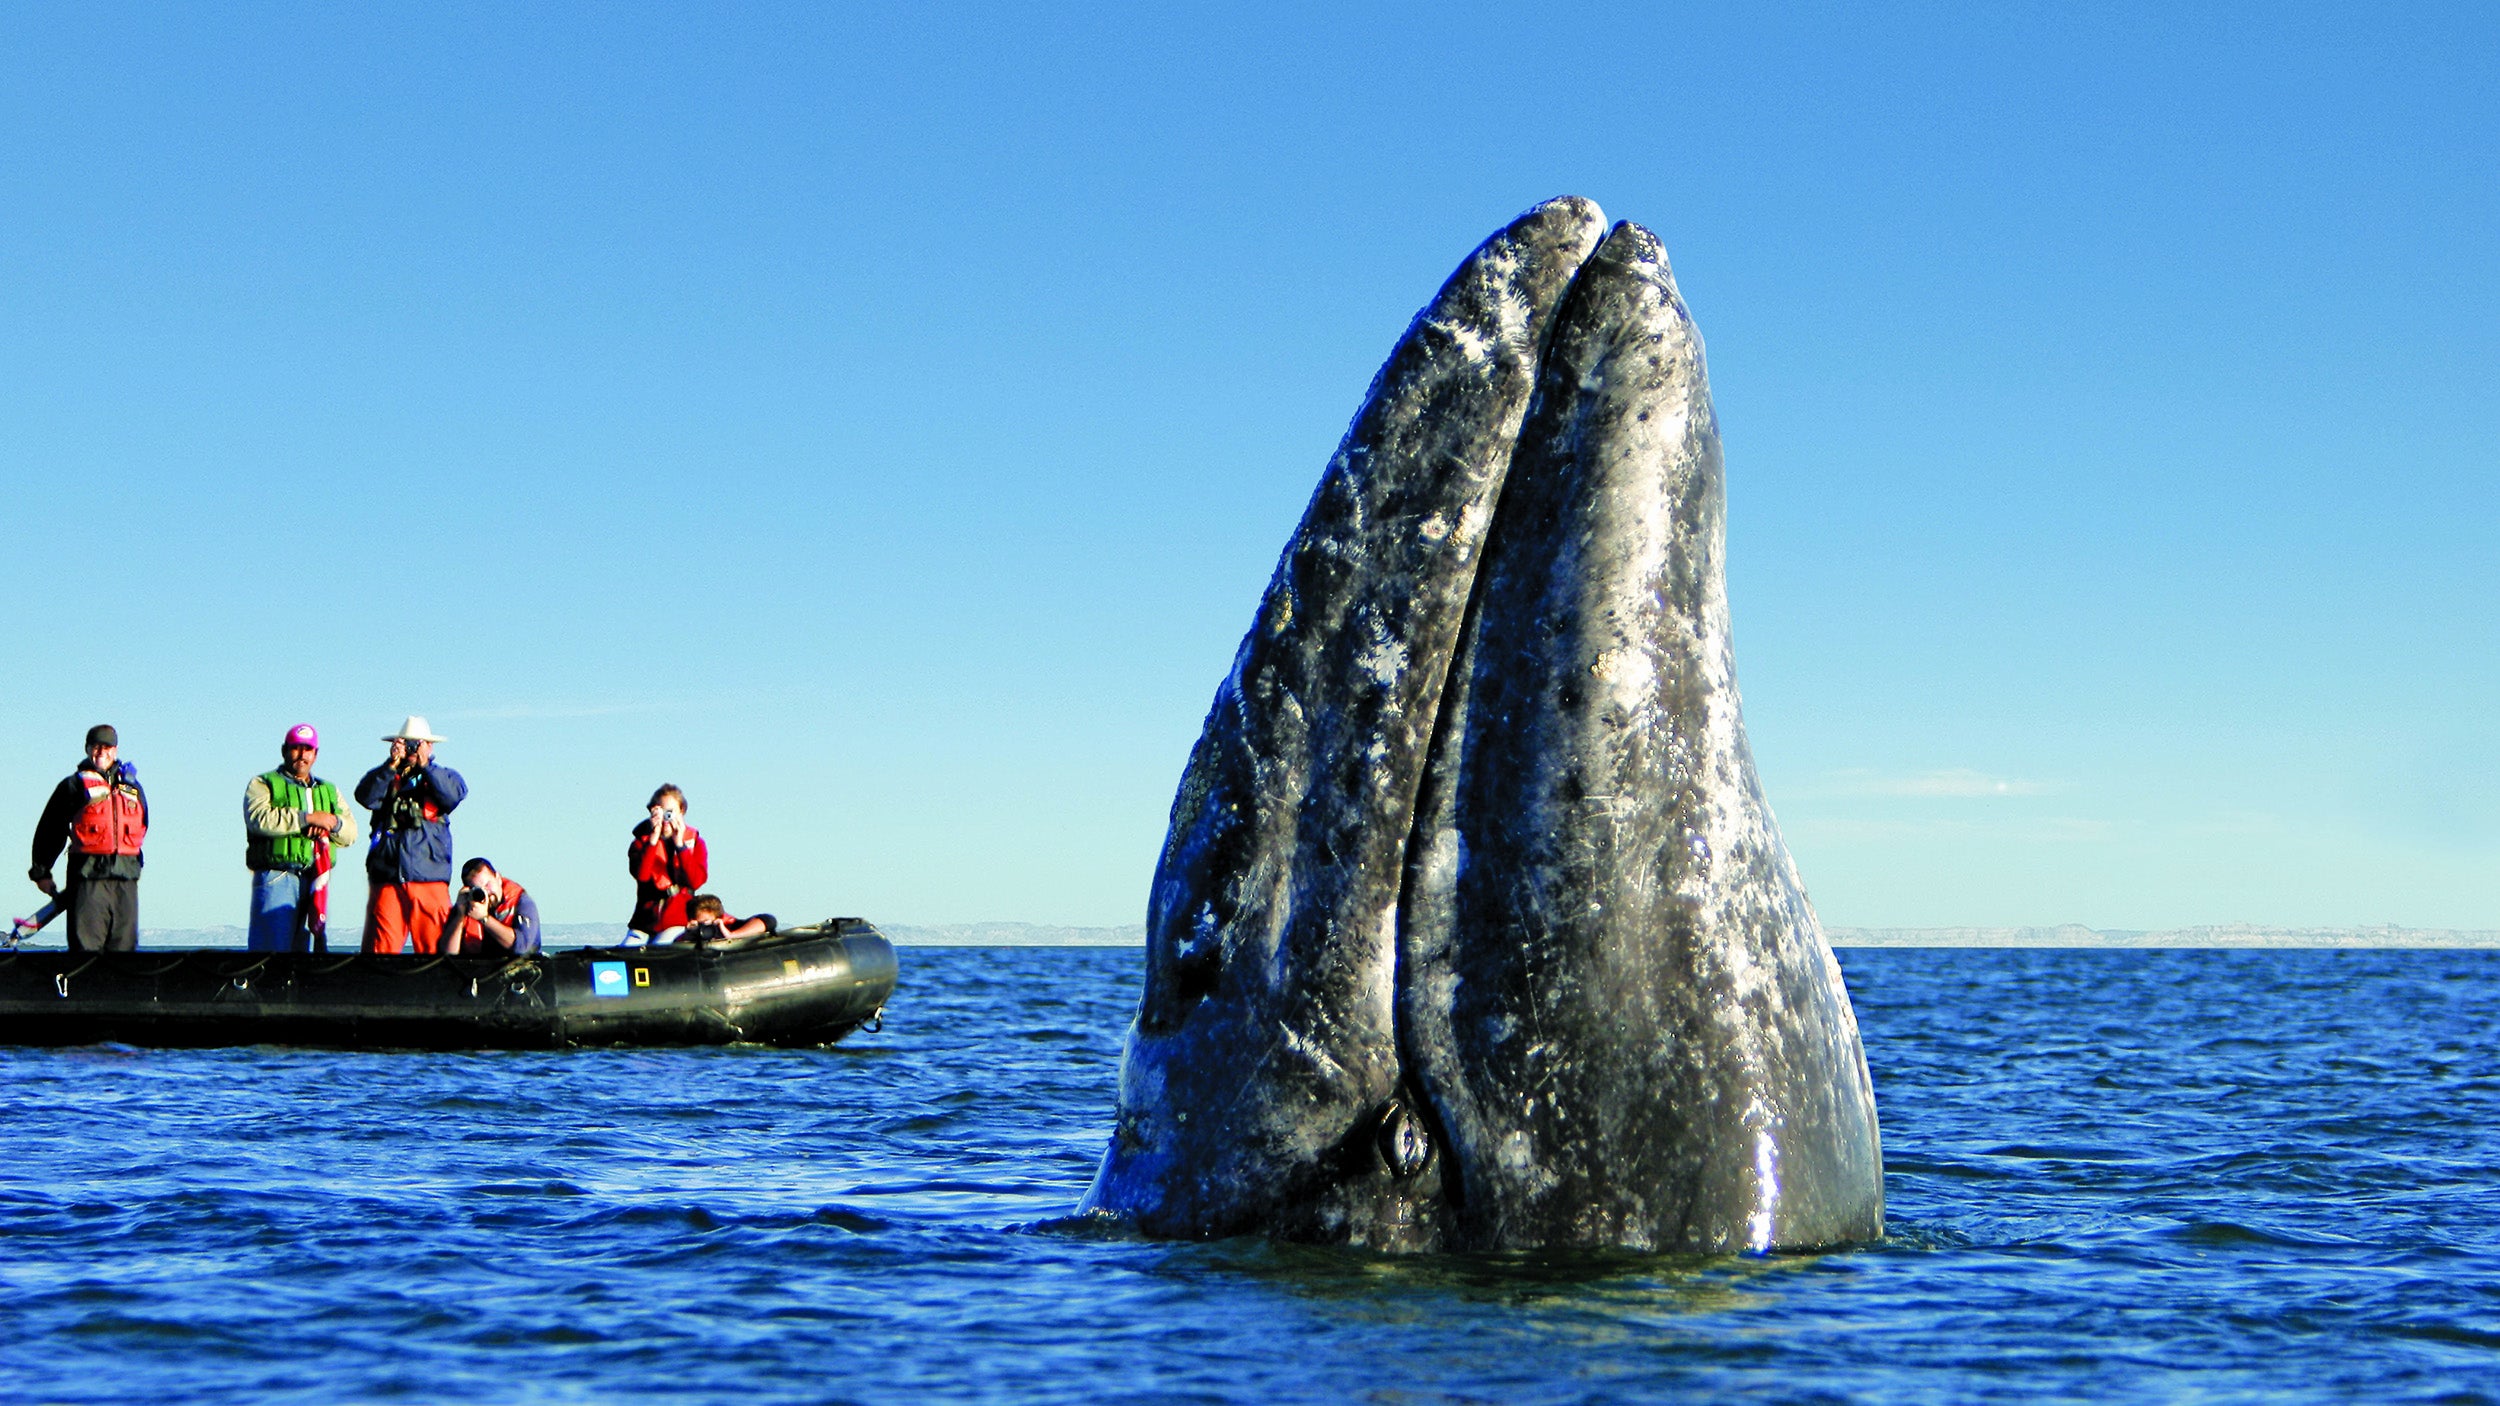 Raft passengers view gray whale emerging from water